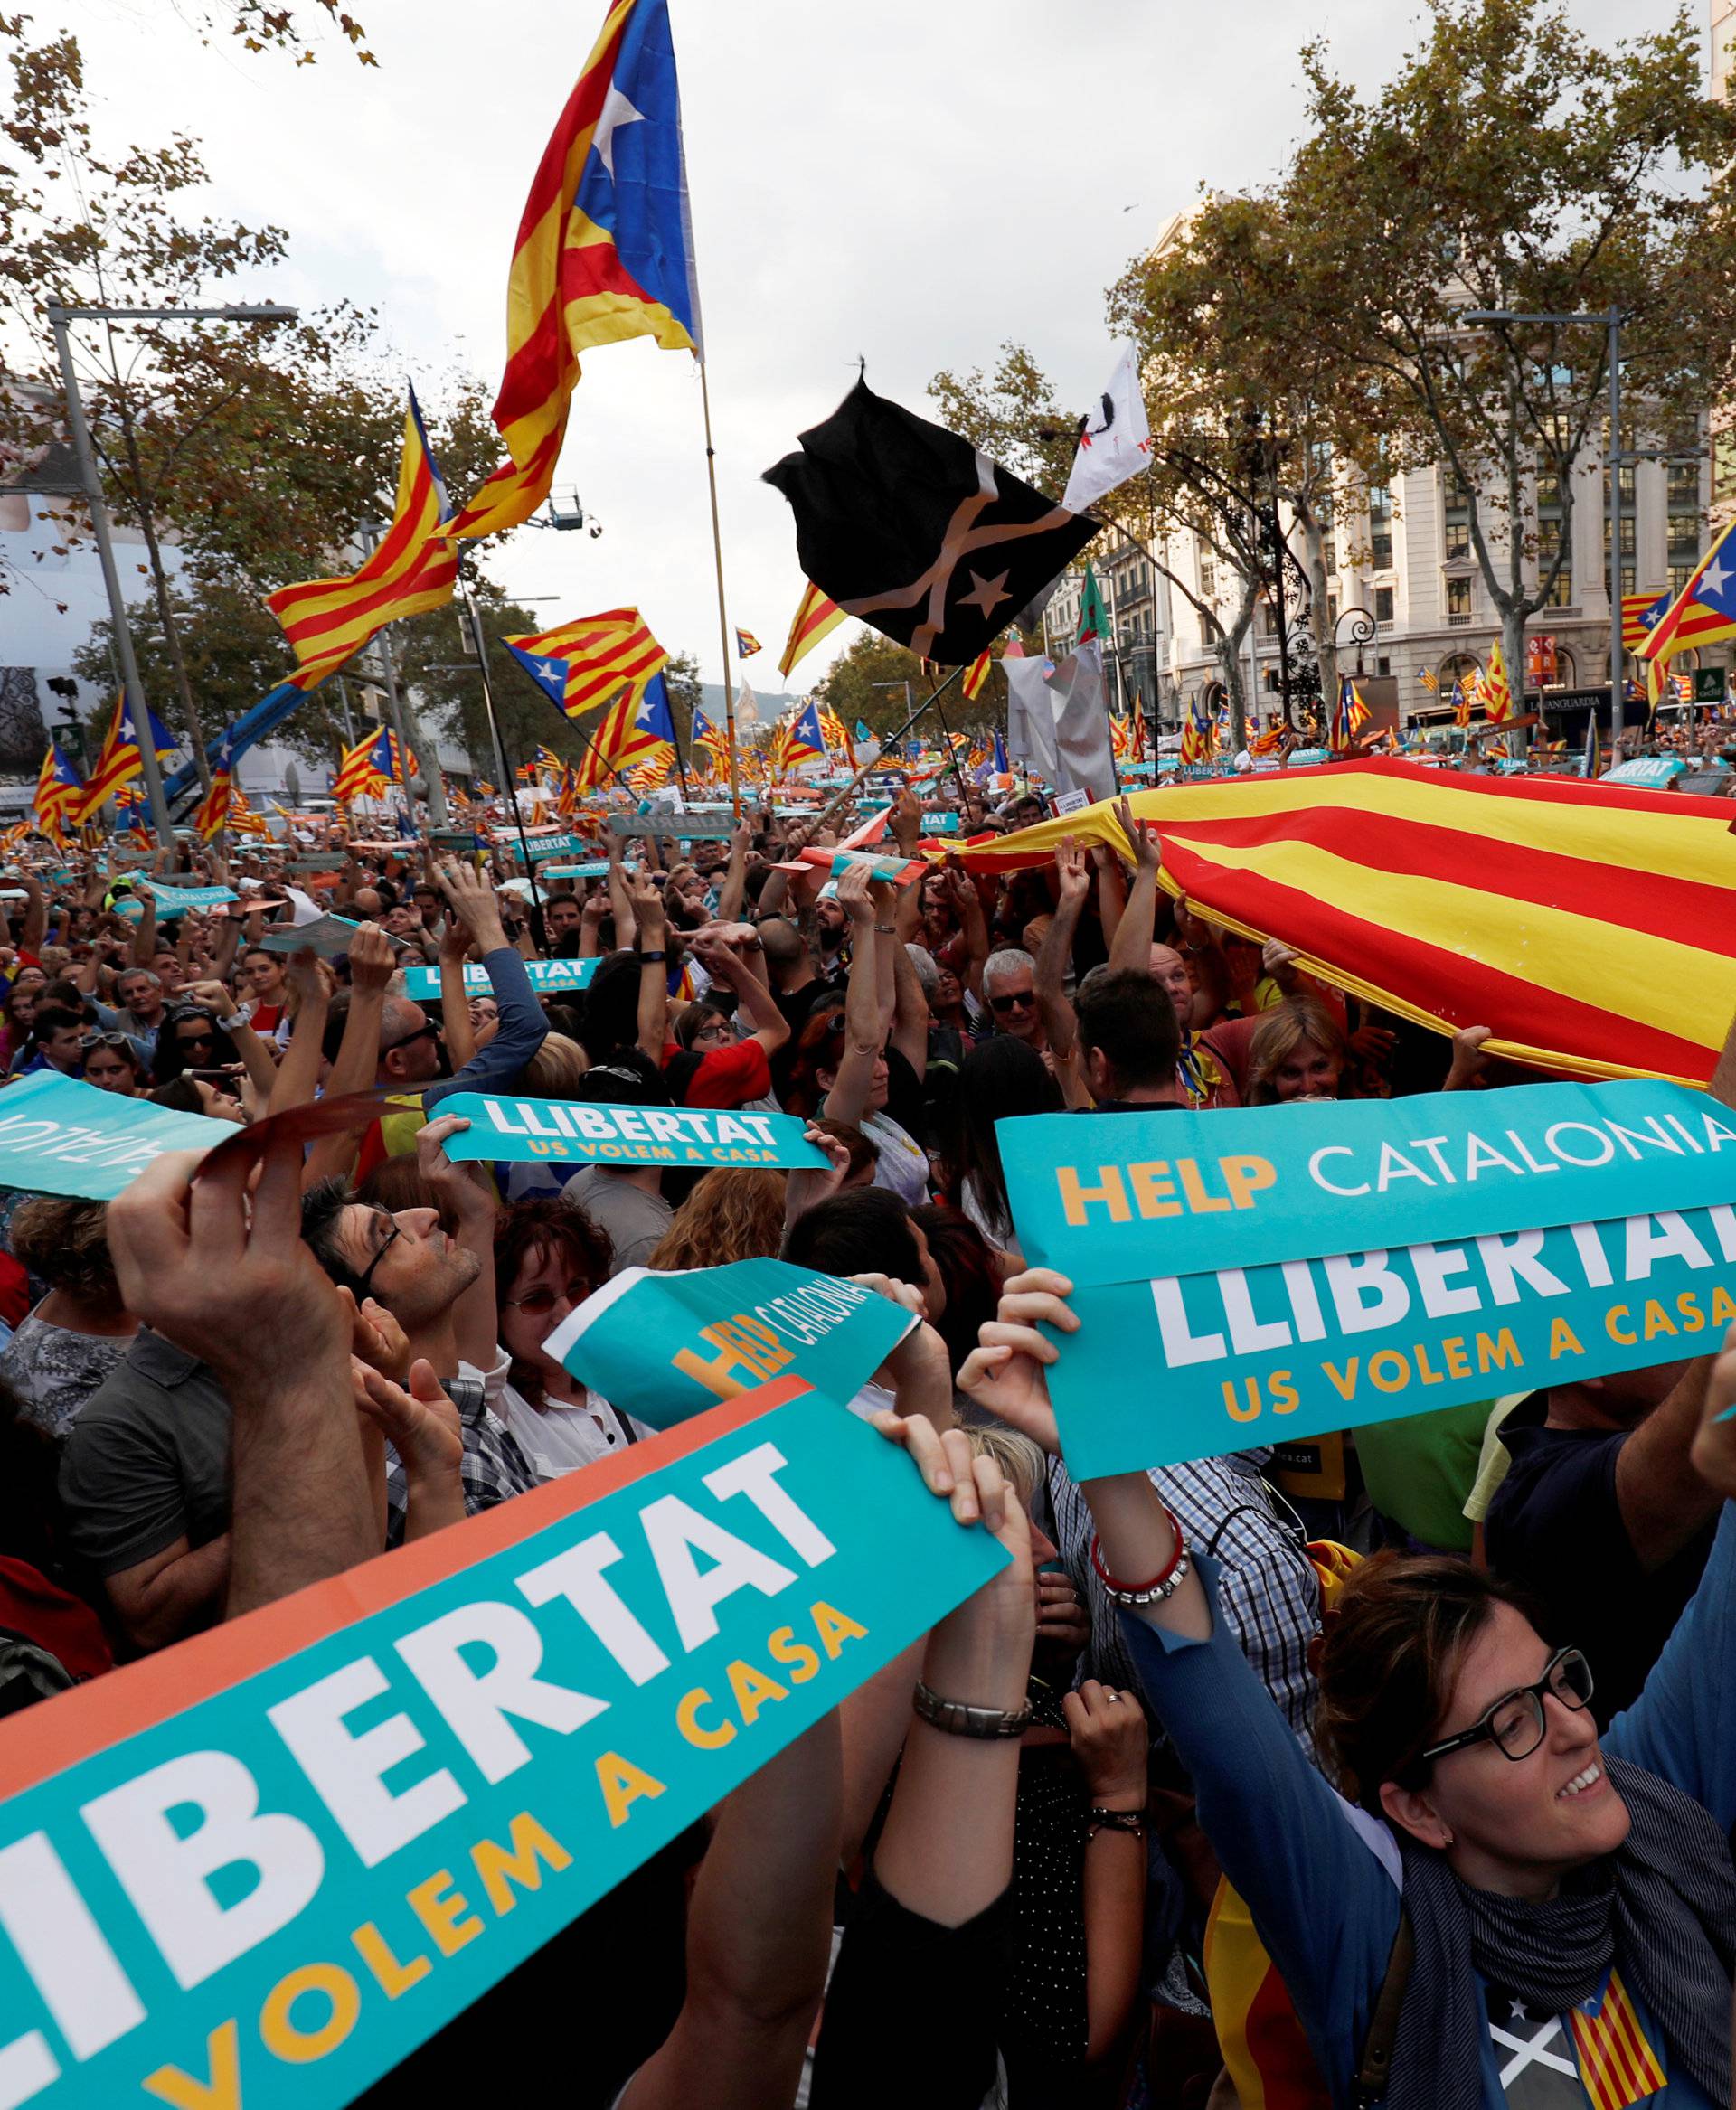 People hold up banners and flags during a demonstration organised by Catalan pro-independence movements ANC (Catalan National Assembly) and Omnium Cutural, following the imprisonment of their two leaders, in